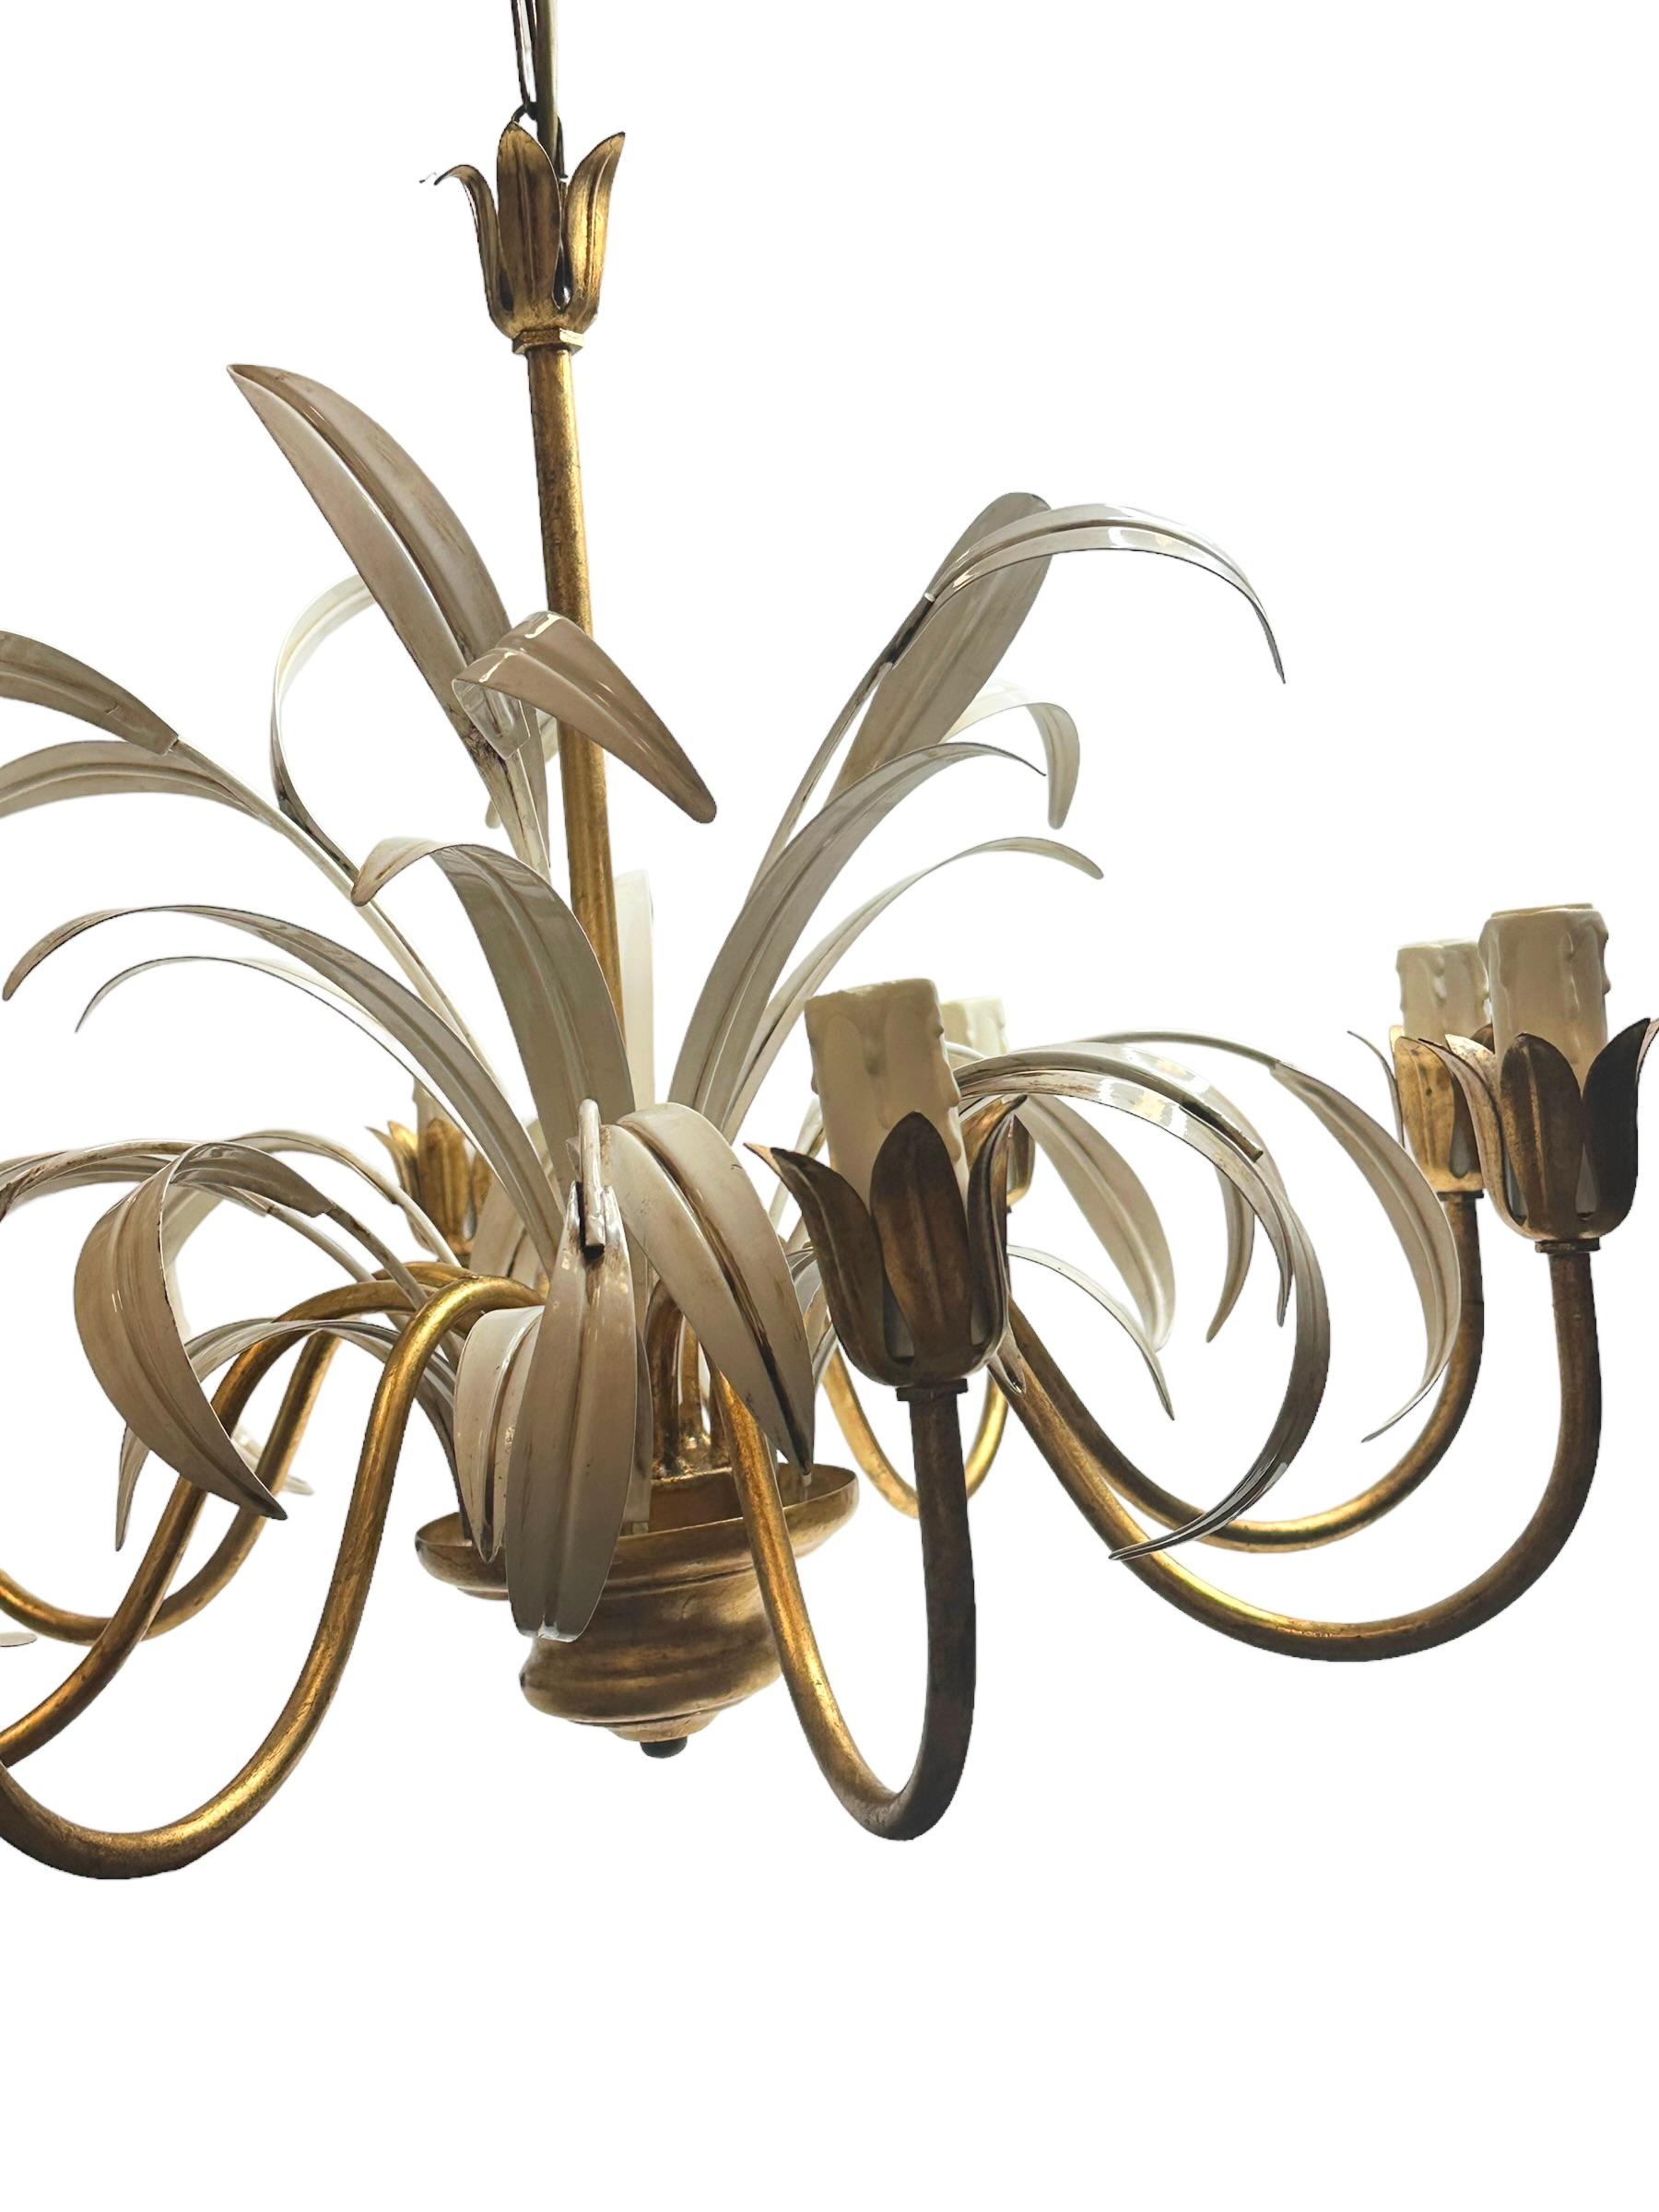 Mid-20th Century 8-Light Gilt Metal Reed Leaf Chandelier Tole Toleware Coco Chanel Style, Italy For Sale